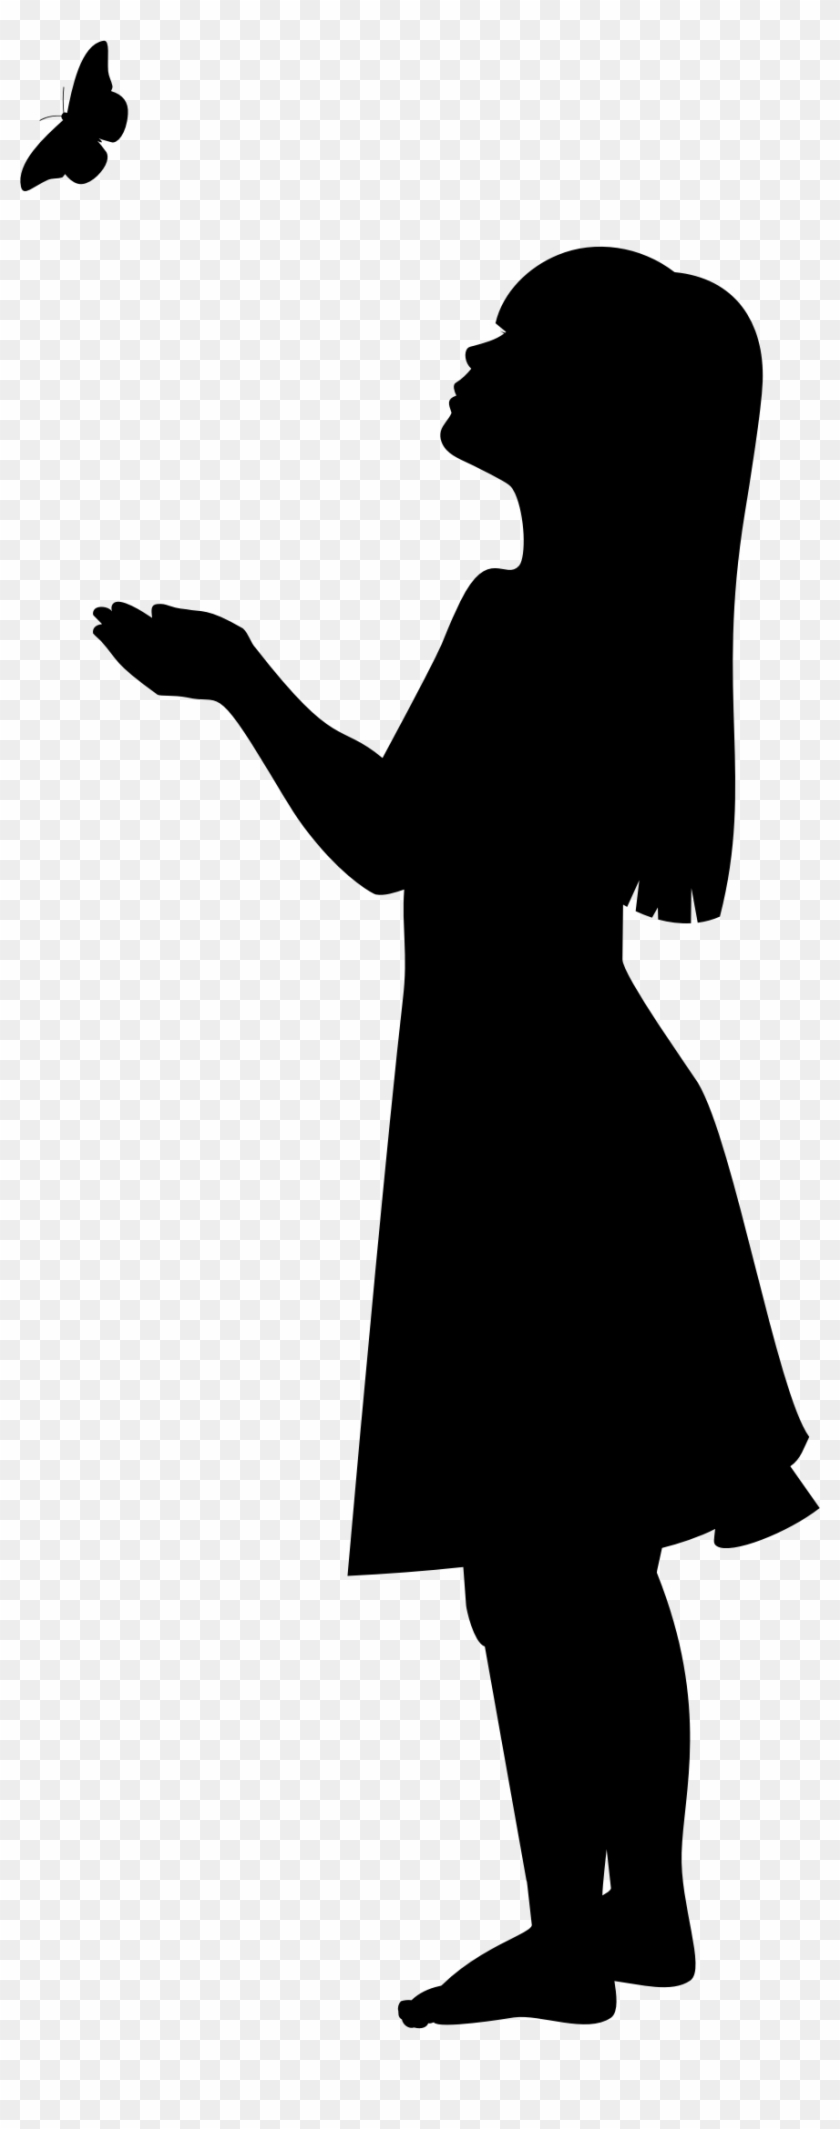 Little Girl Praying Silhouette At Getdrawings - Little Girl Silhouette Clipart #354991